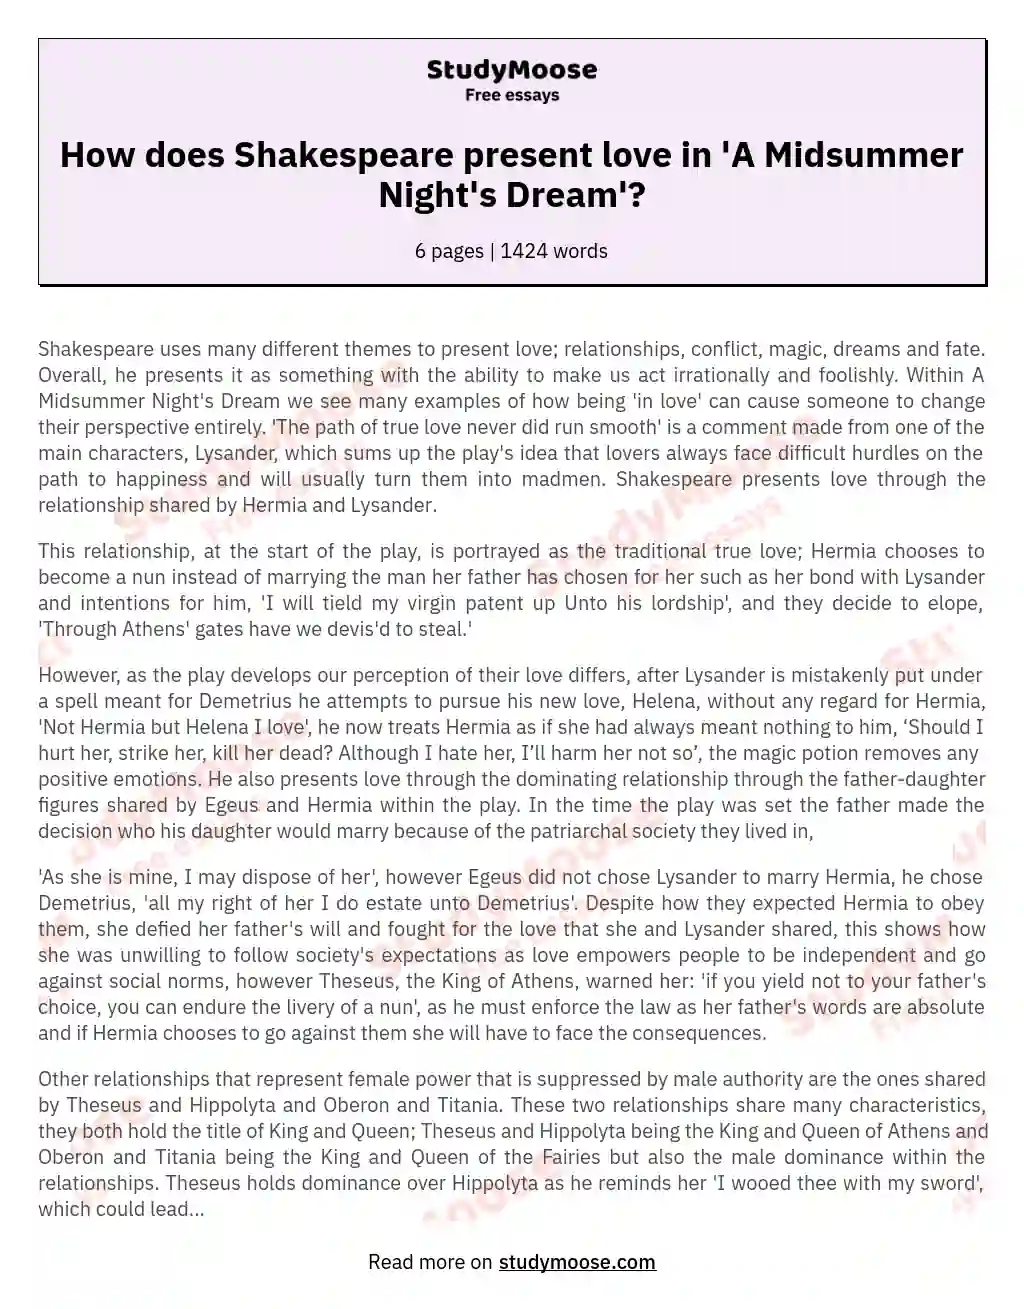 How does Shakespeare present love in 'A Midsummer Night's Dream'? essay